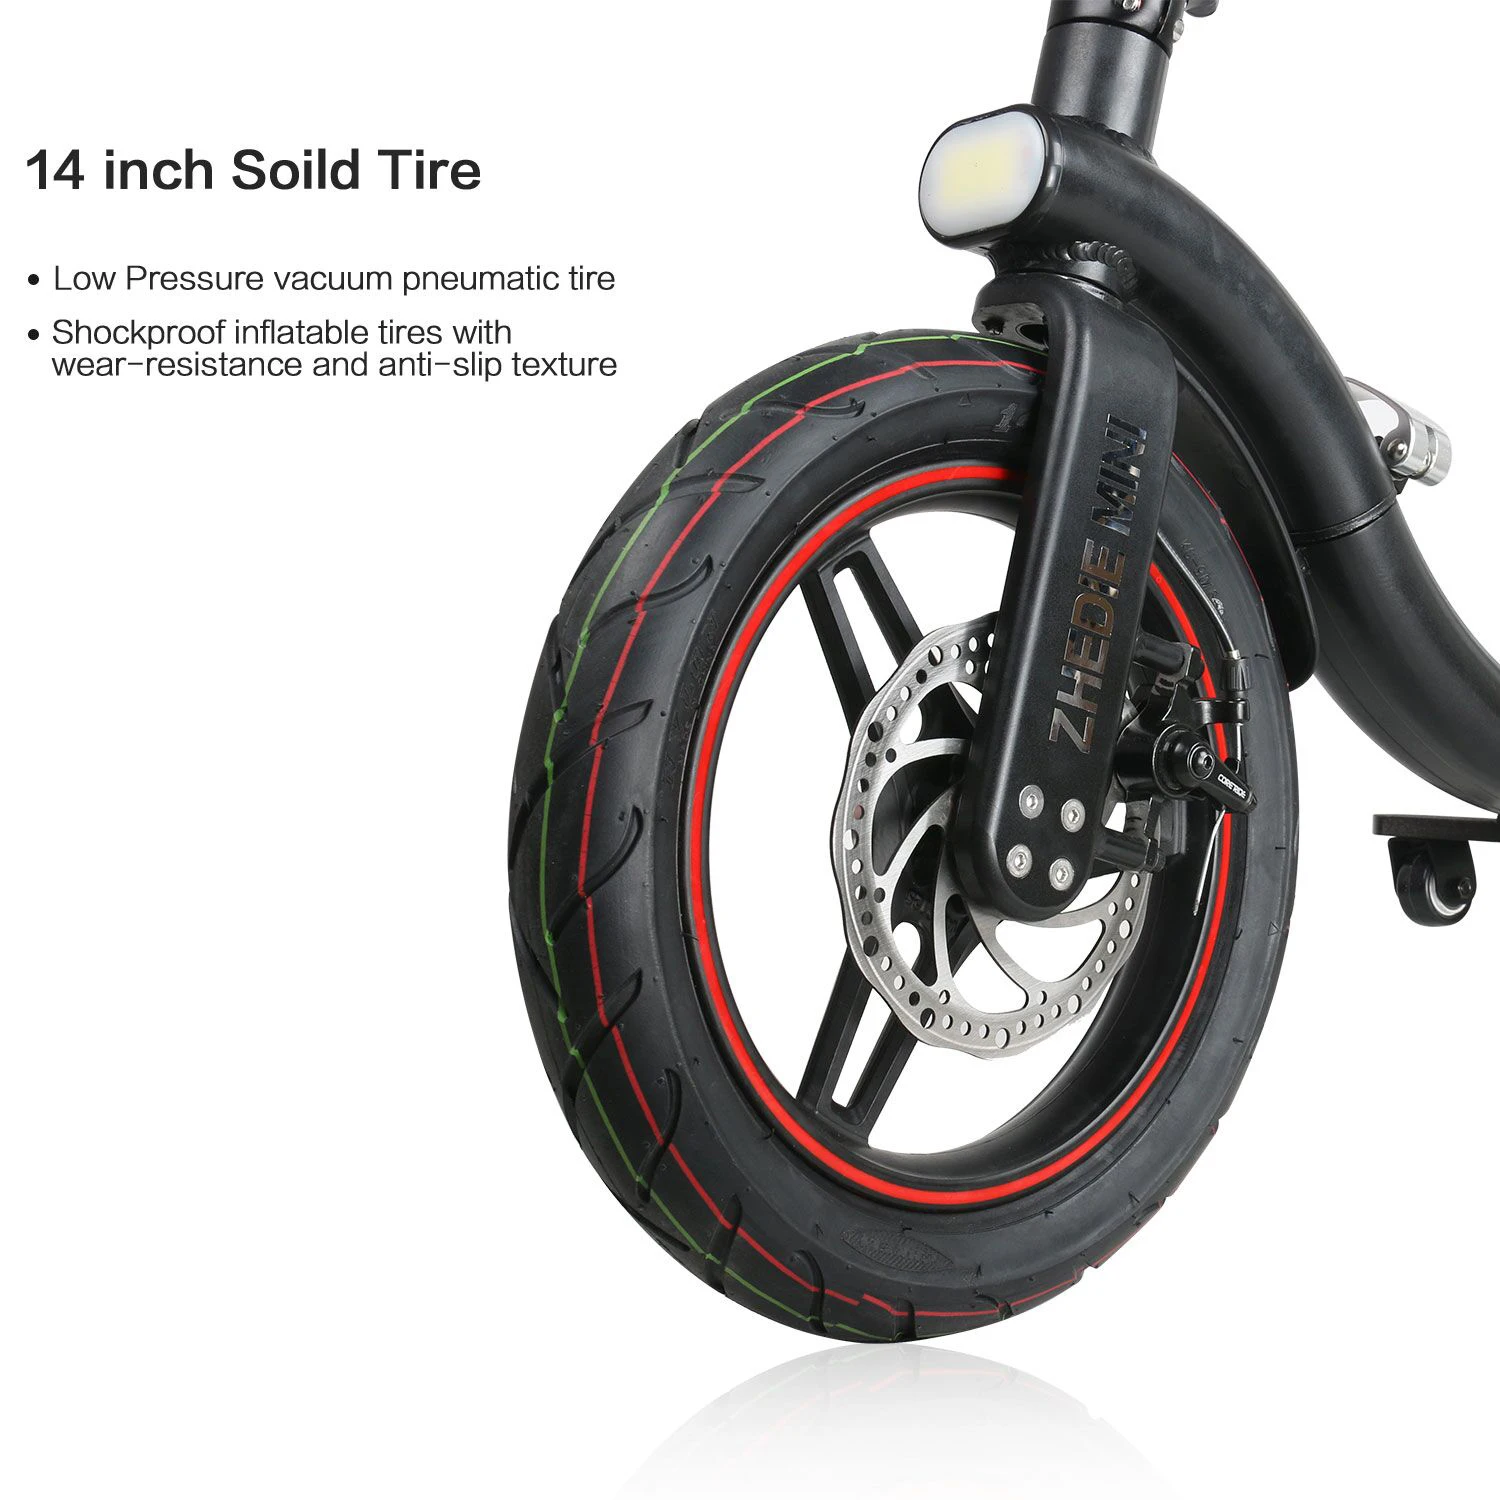 EU Stock ! No Tax ! Electric Bicycle Scooter 14 Inch Tire With 450W Power Full Foldable Long Range Electric Bike Adults Child